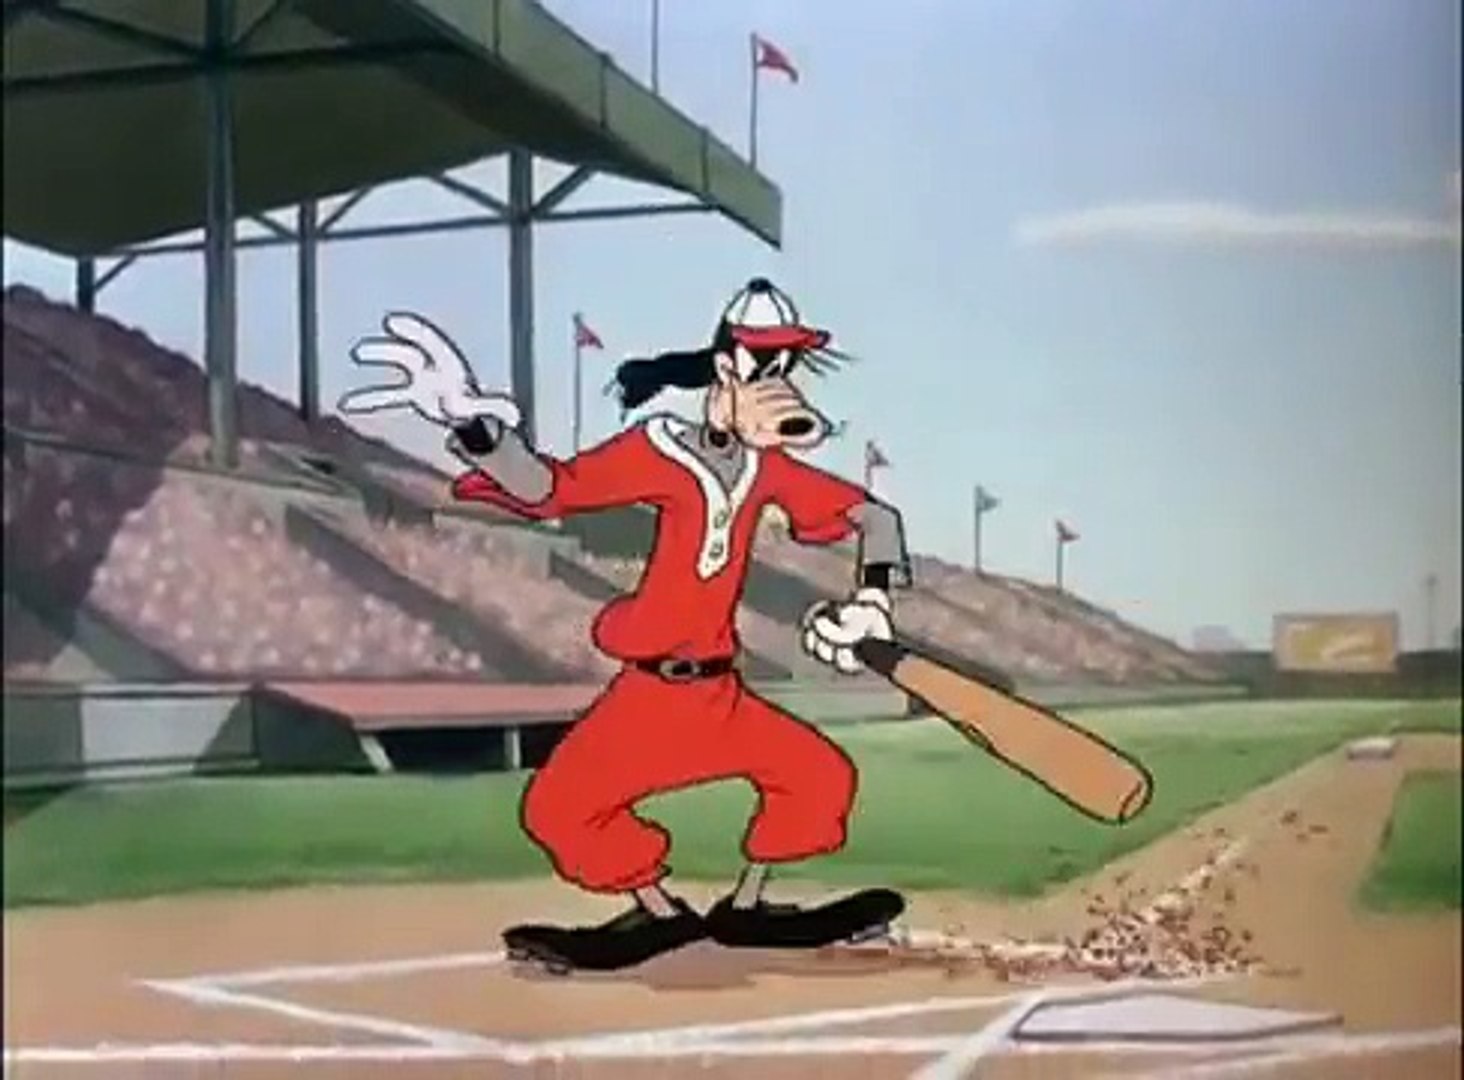 How to Play Baseball | A Goofy Cartoon | Have a Laugh! - Dailymotion Video